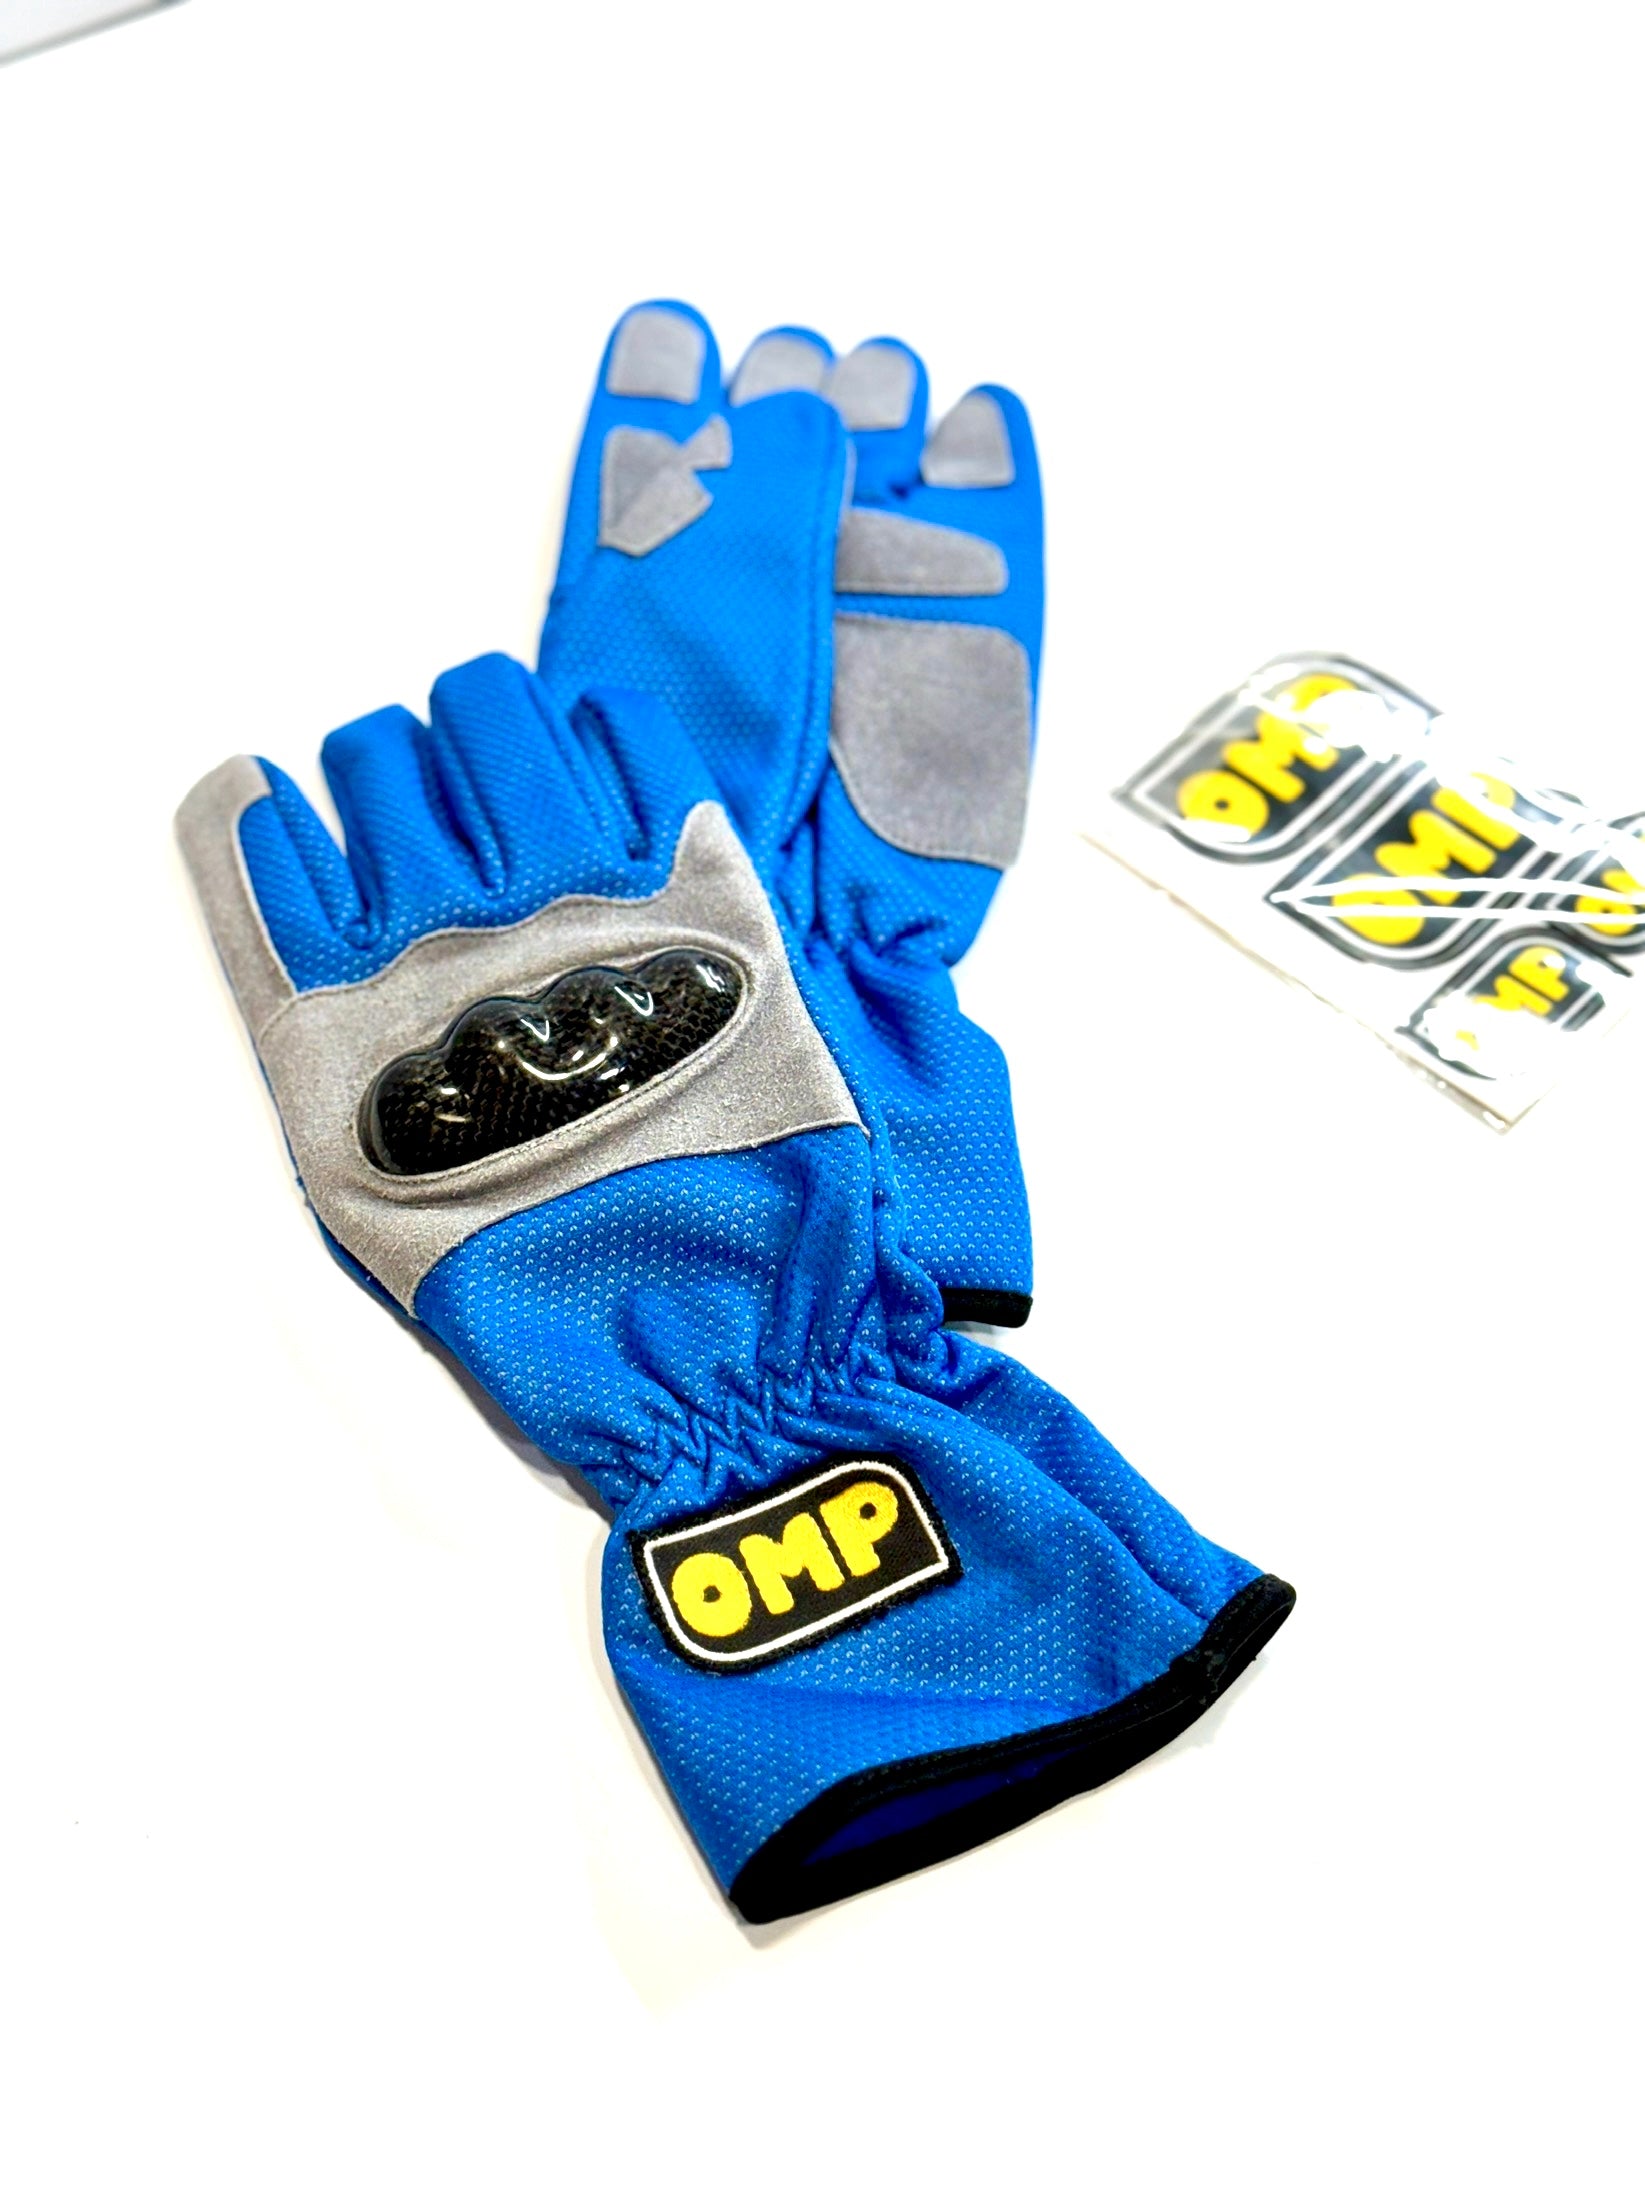 OMP KARTING RAIN GLOVES WITH HARD KNUCKLE PROTECTION